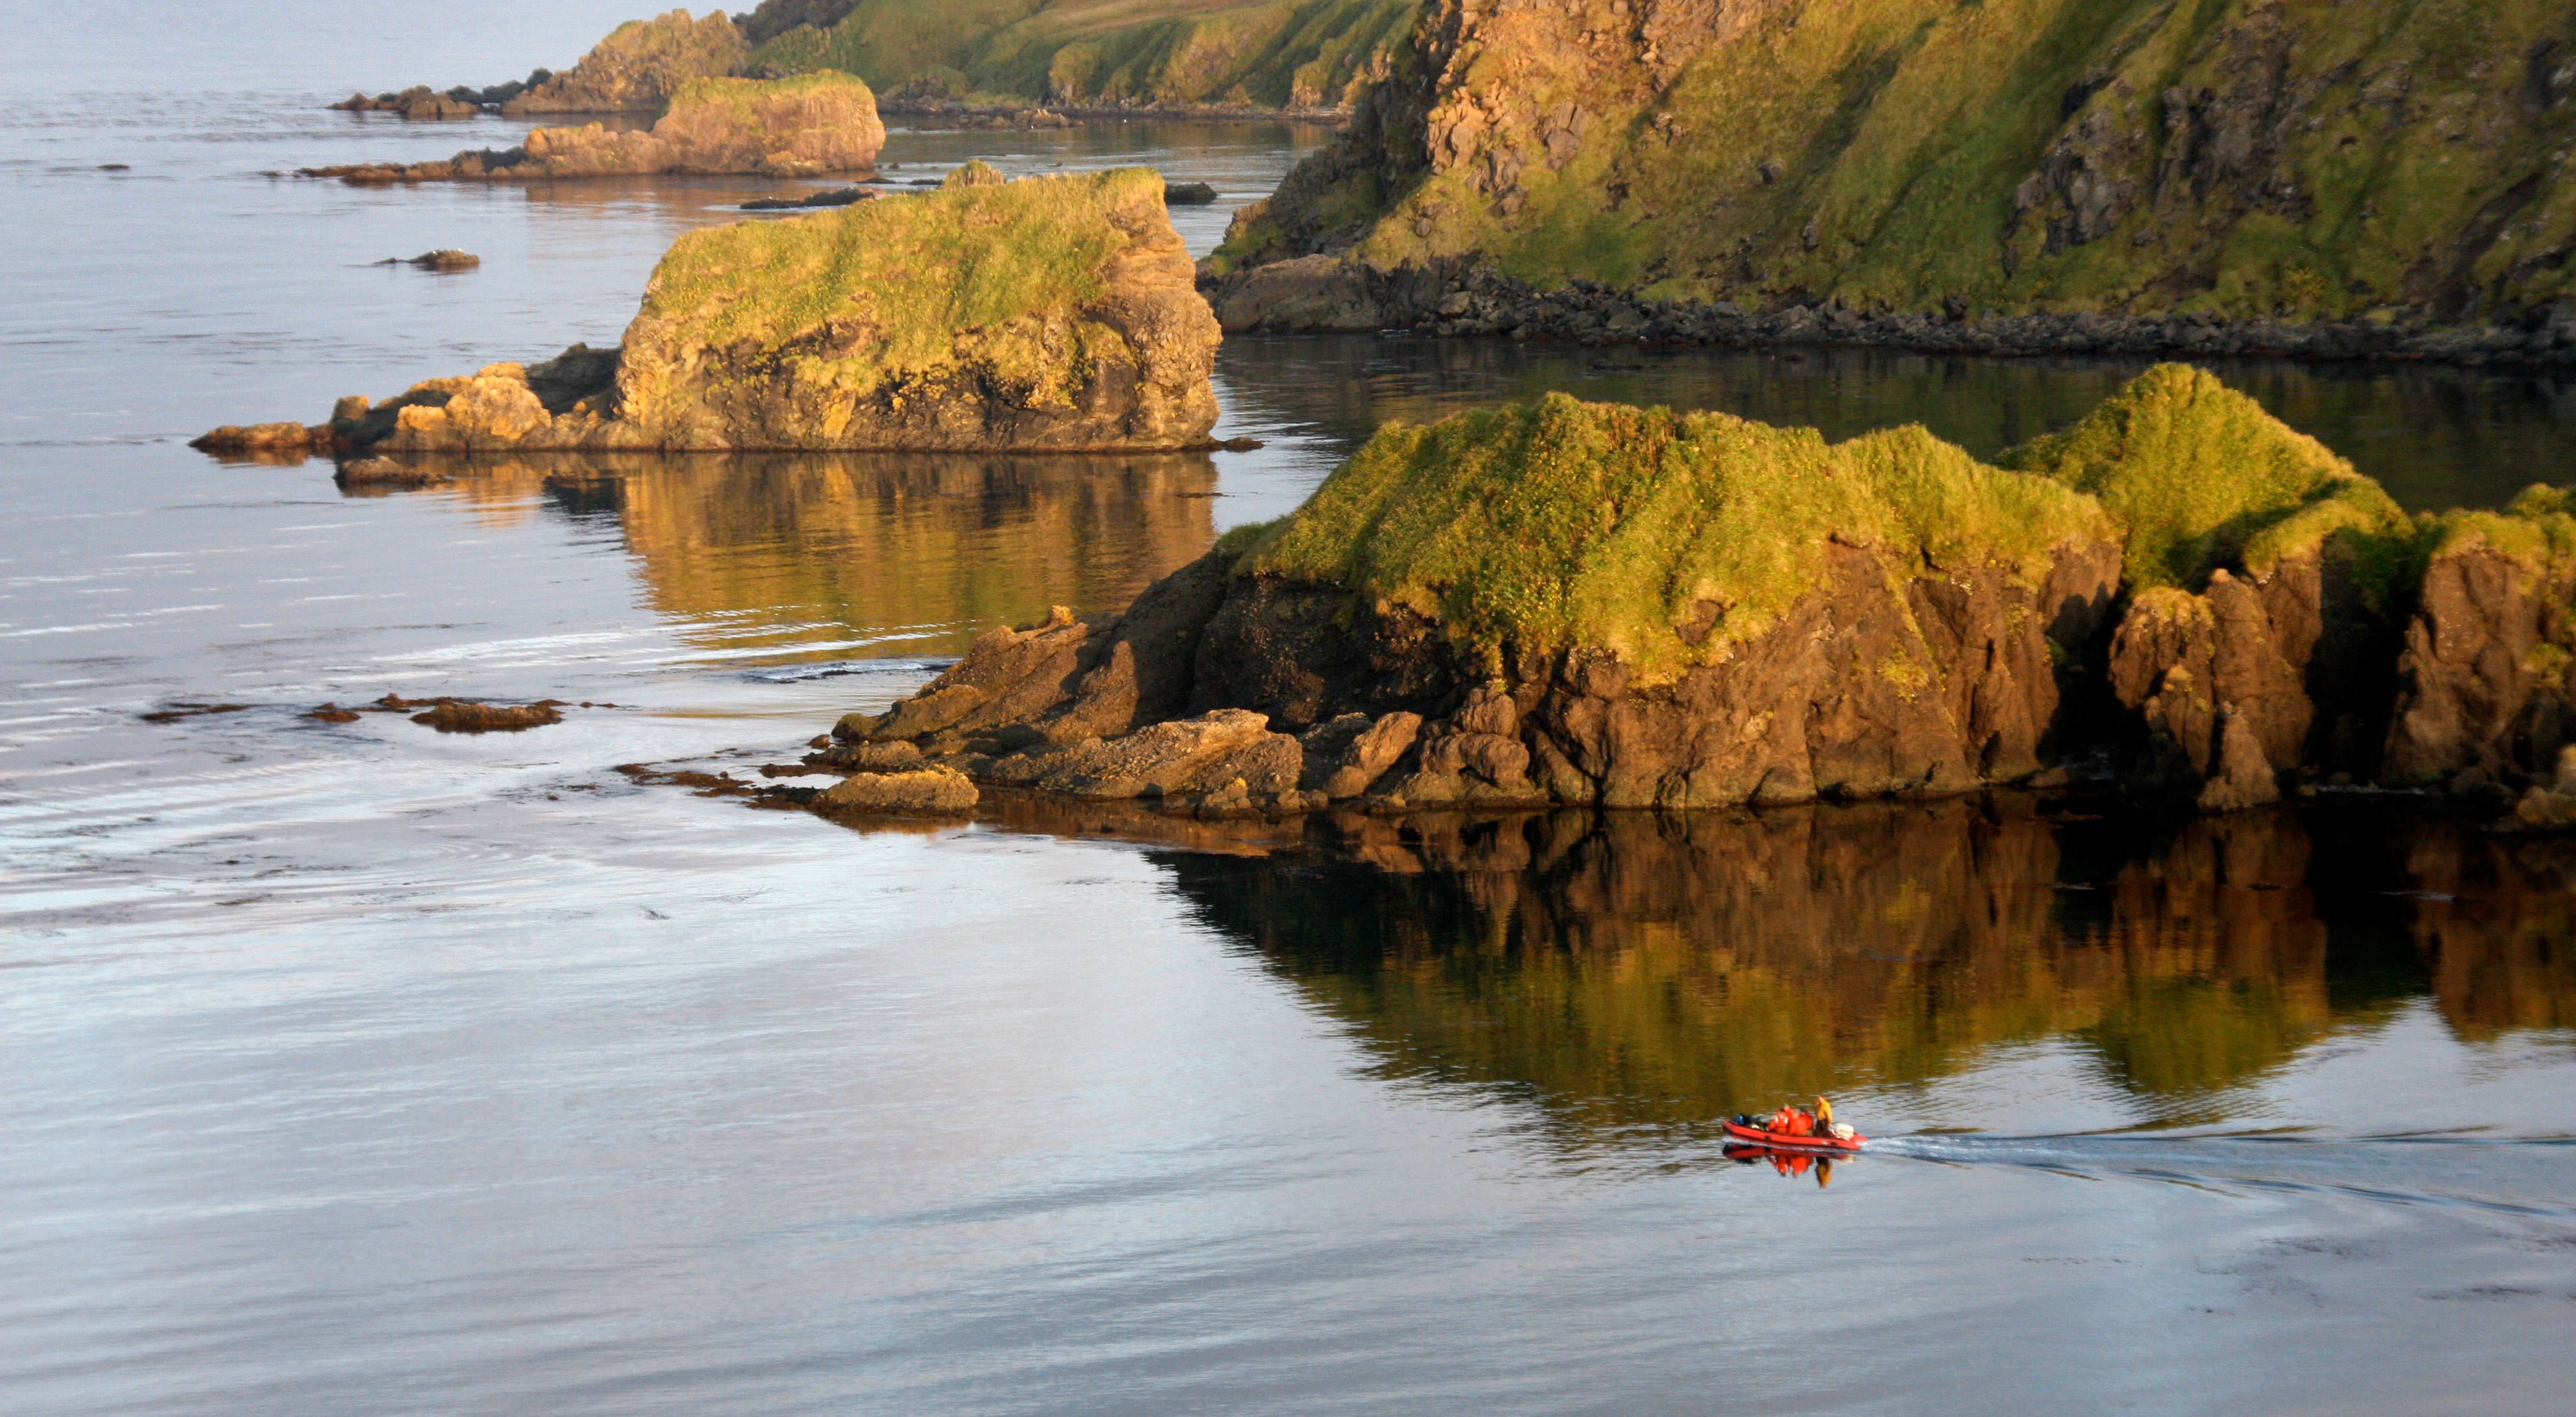 A small red dinghy is dwarfed by the rocky shoreline of Hawadax Island.